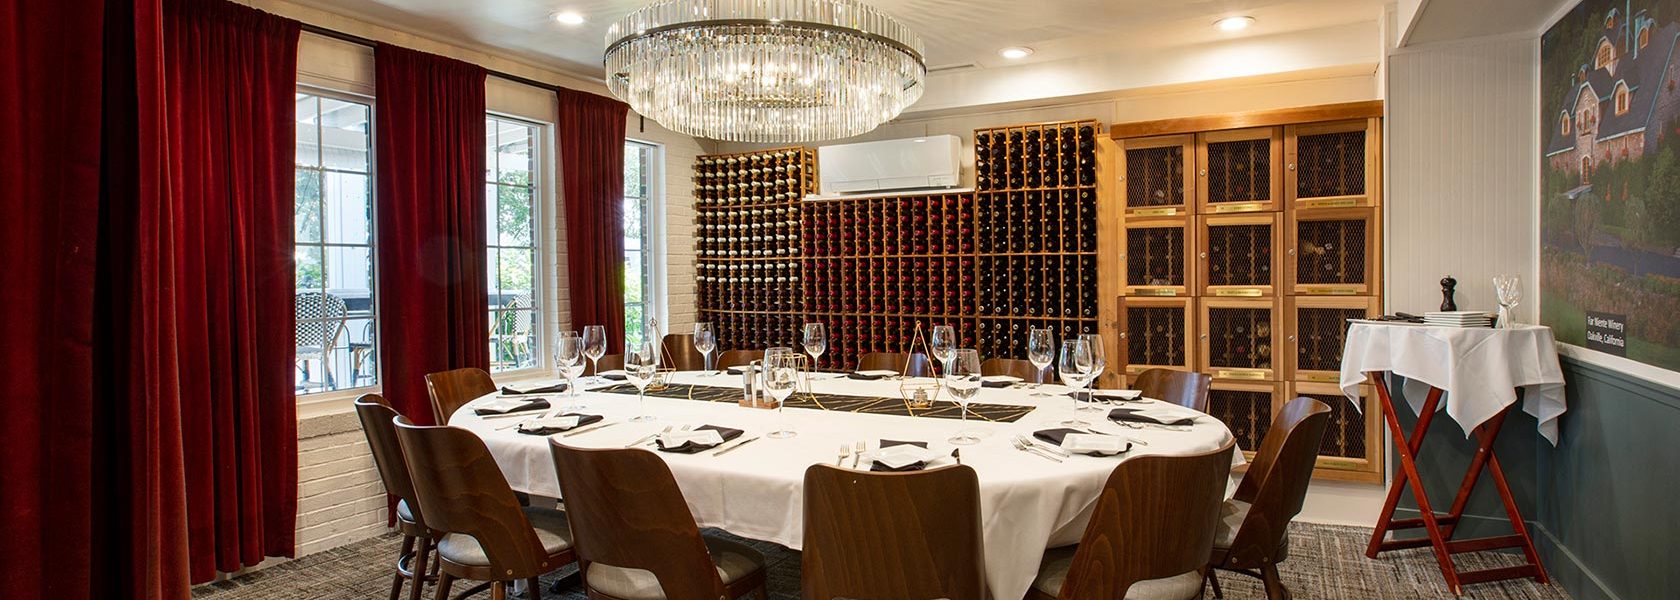 Private dining room and wine cellar with service set for 12 at oval table.